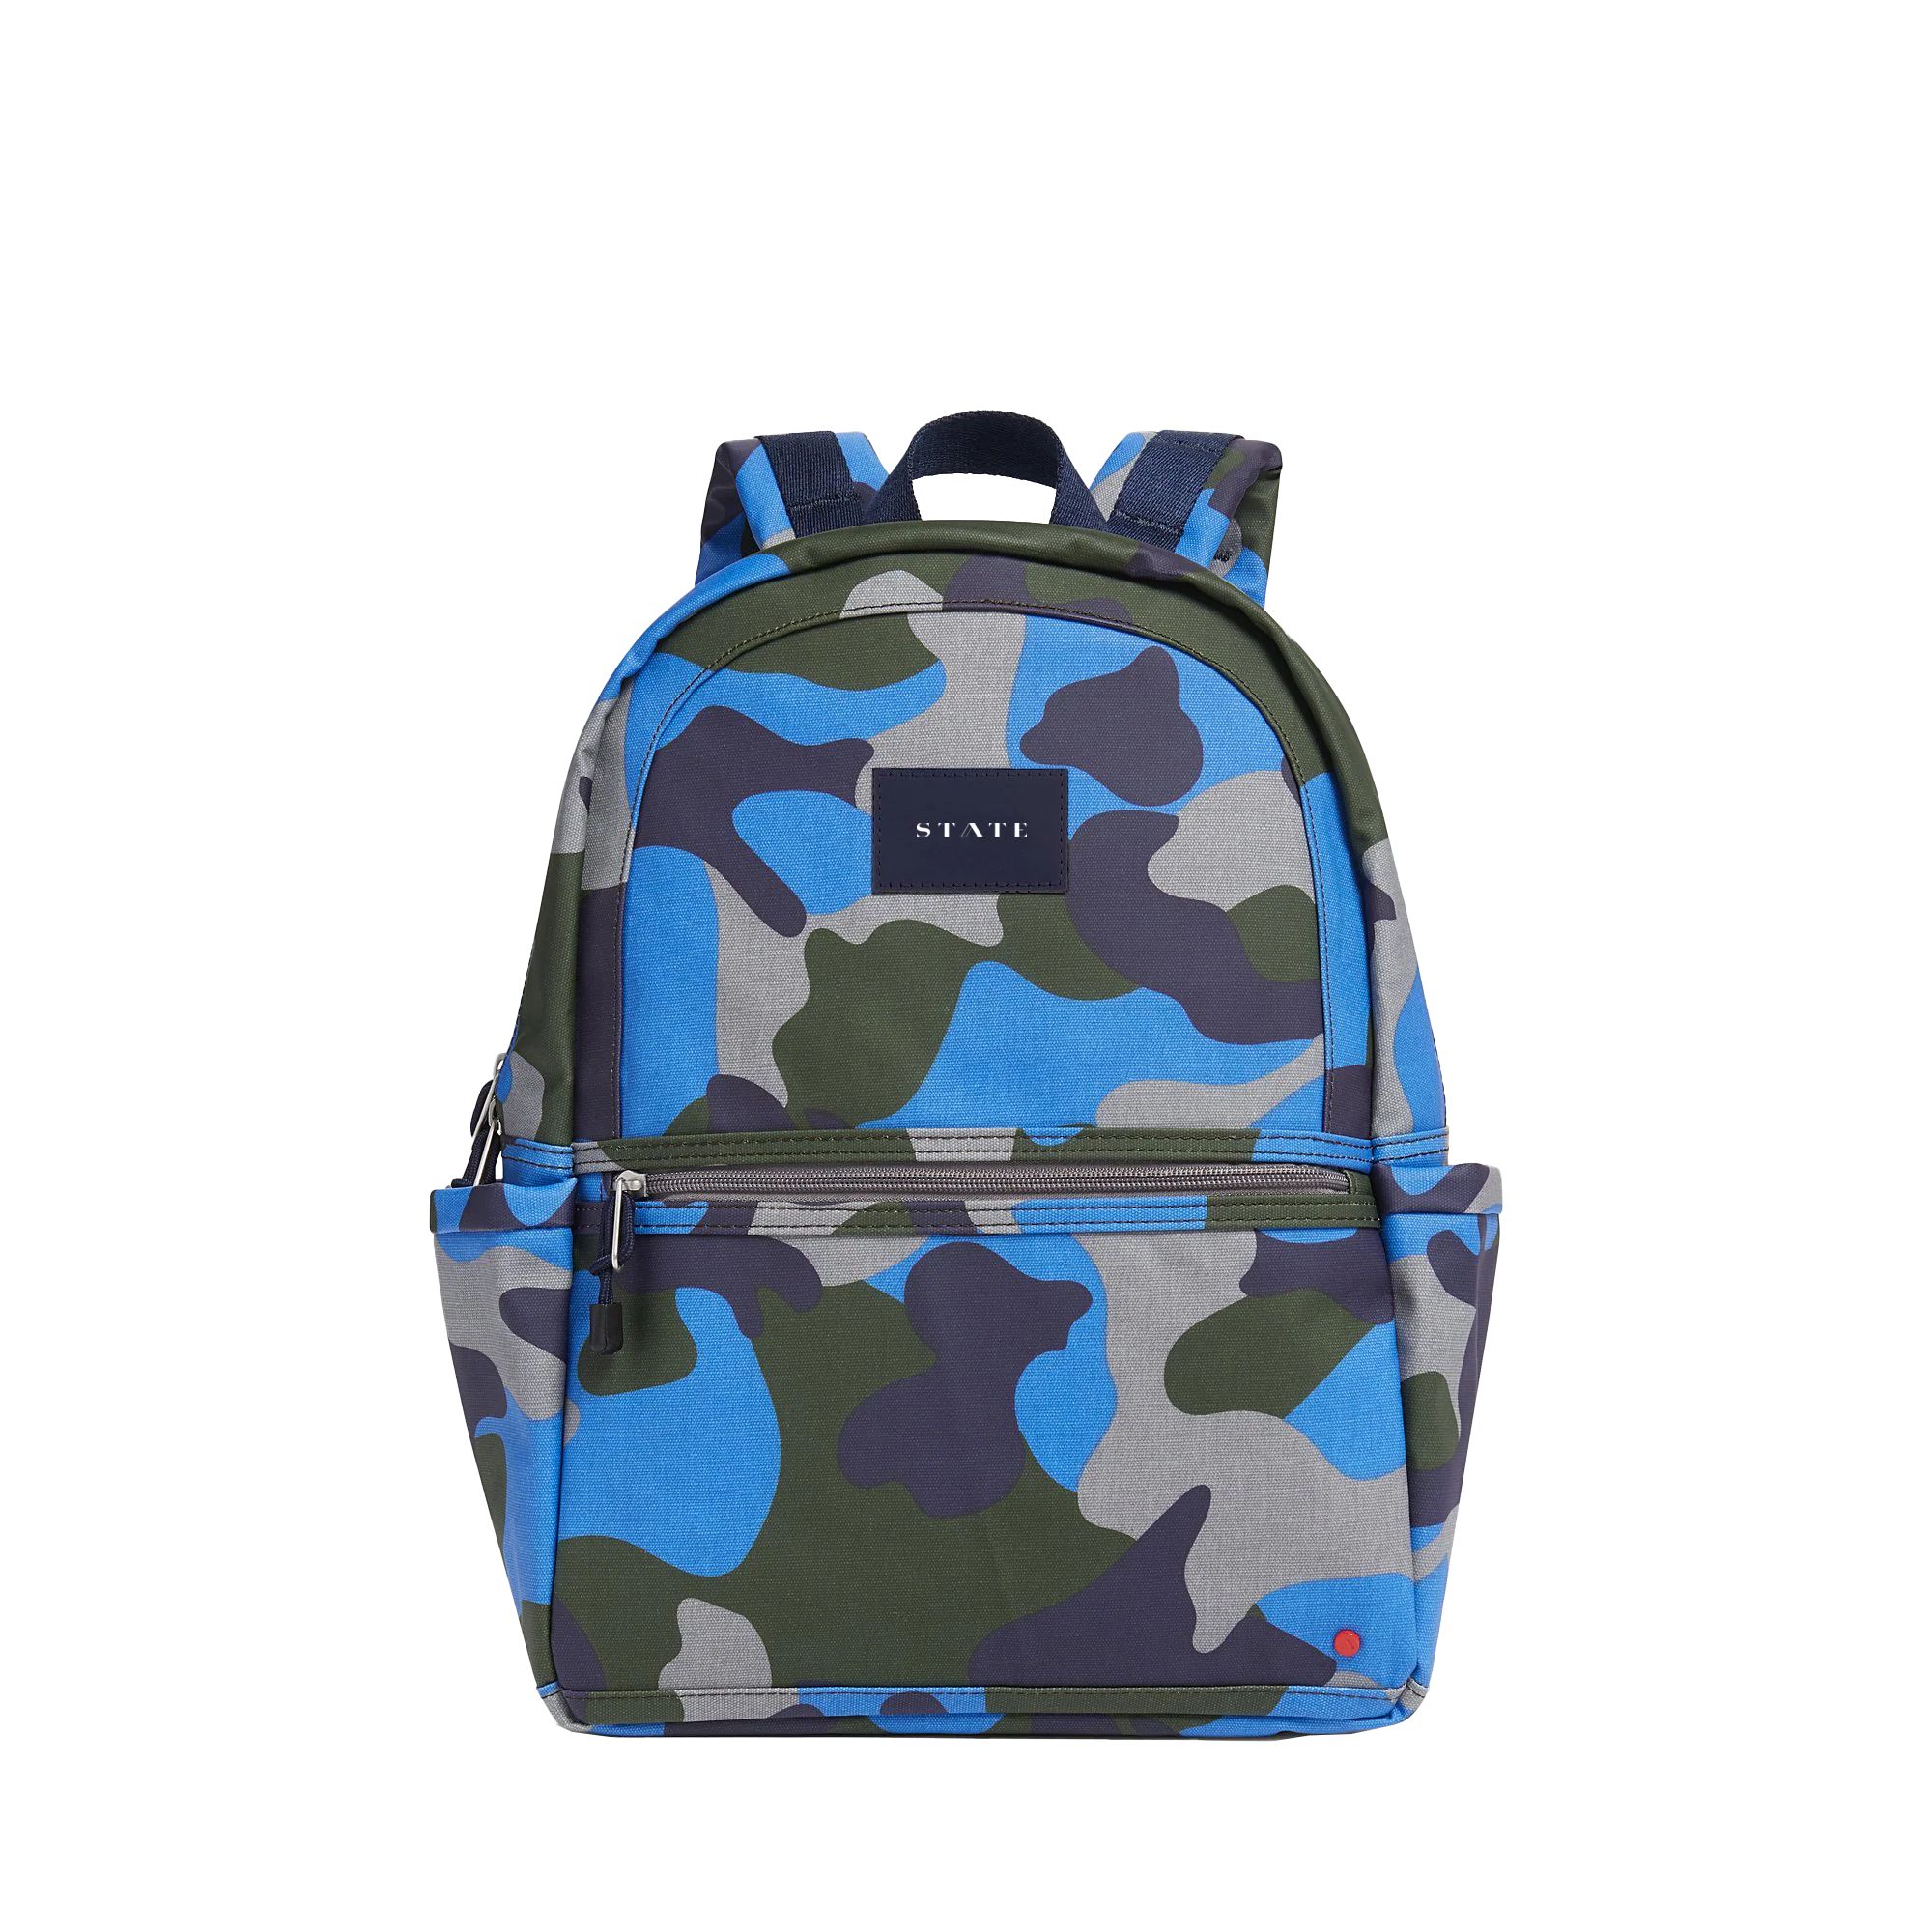 Kane Kids Travel Backpack Printed Canvas Camo | STATE Bags